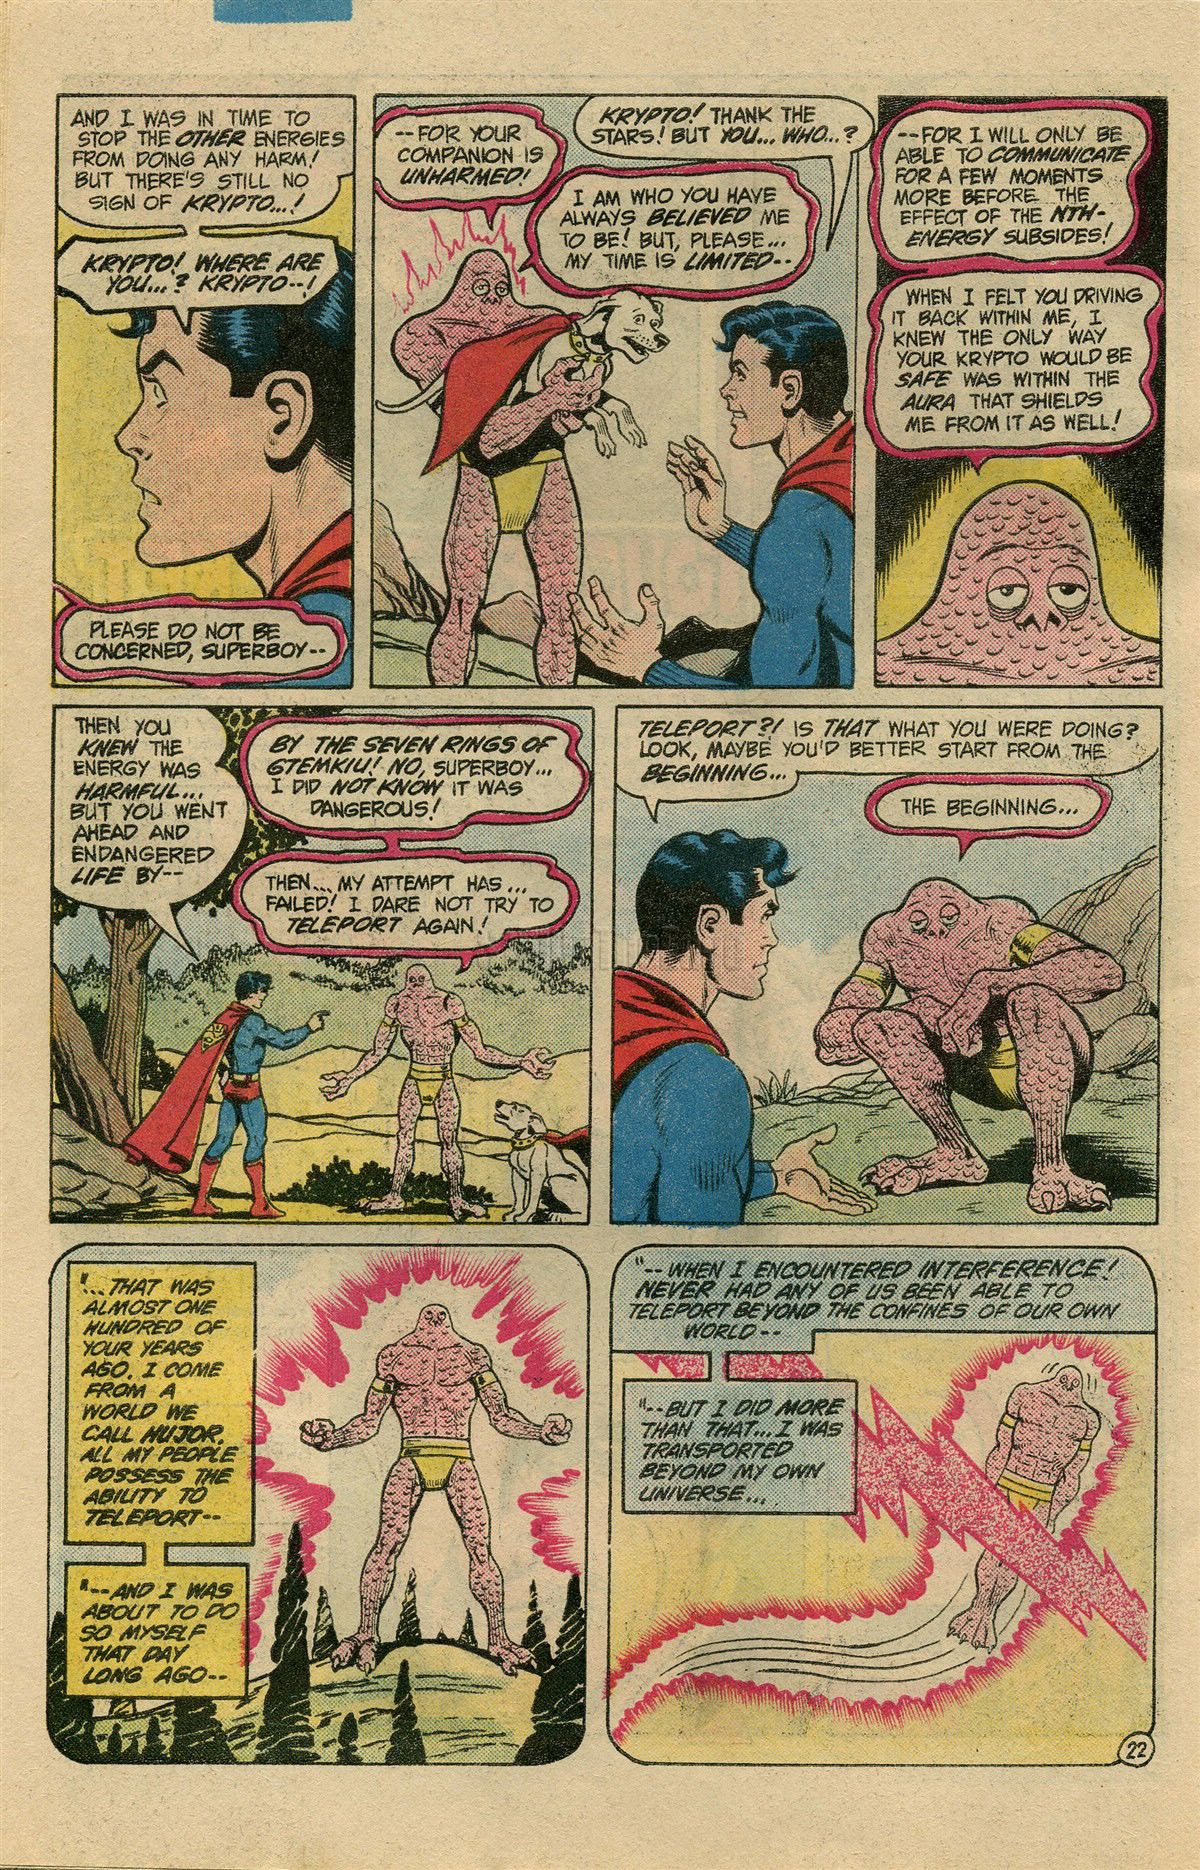 The New Adventures of Superboy 52 Page 28